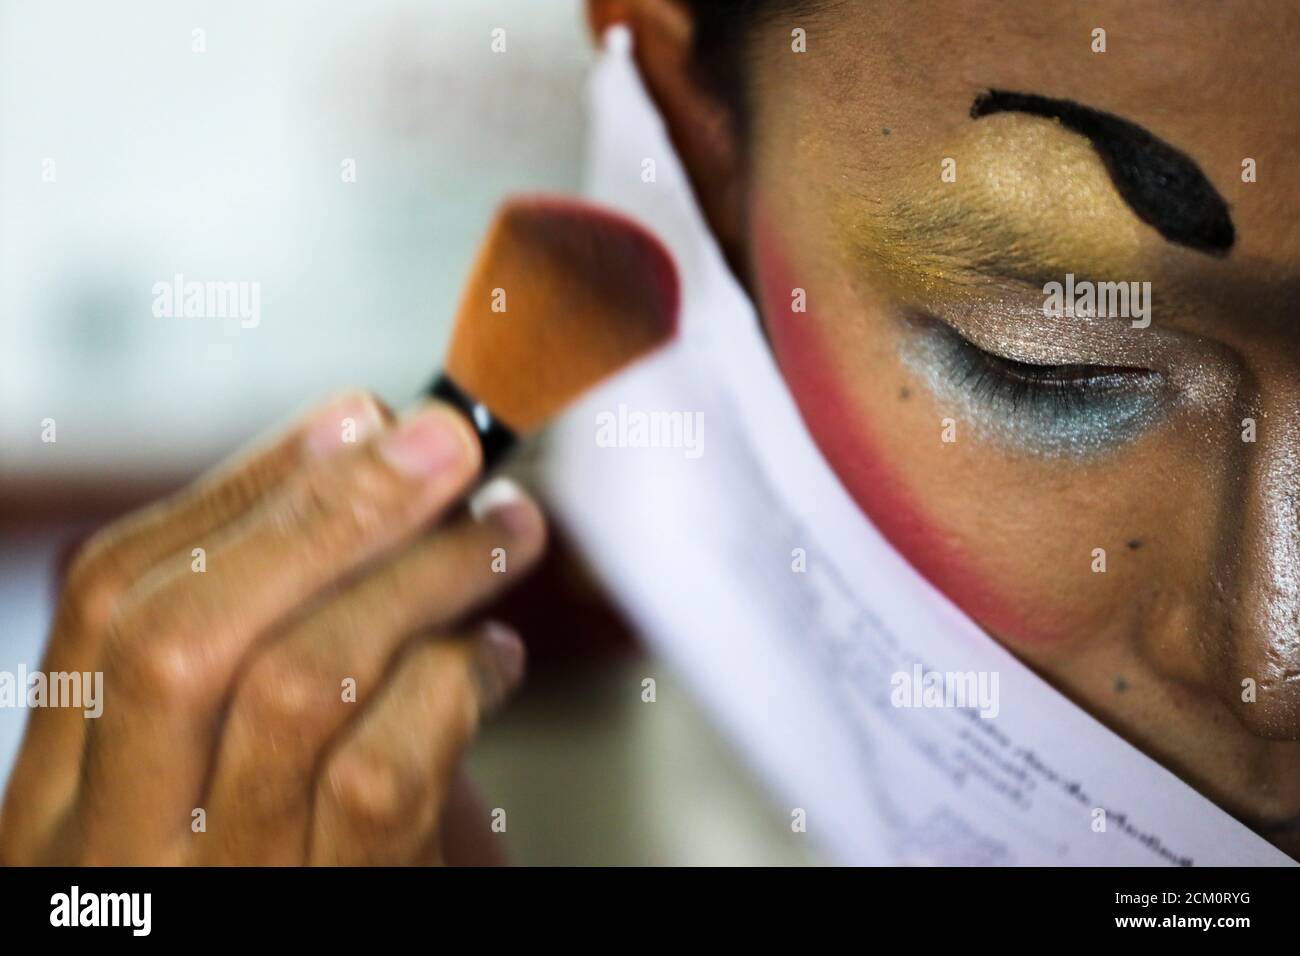 REFILE - CORRECTING TYPO IN NAME Teeraphong Meesat, 29, known as teacher  Bally applies make up before his English class at the Prasartratprachakit  School in Ratchaburi Province, Thailand, July 10, 2019. Picture